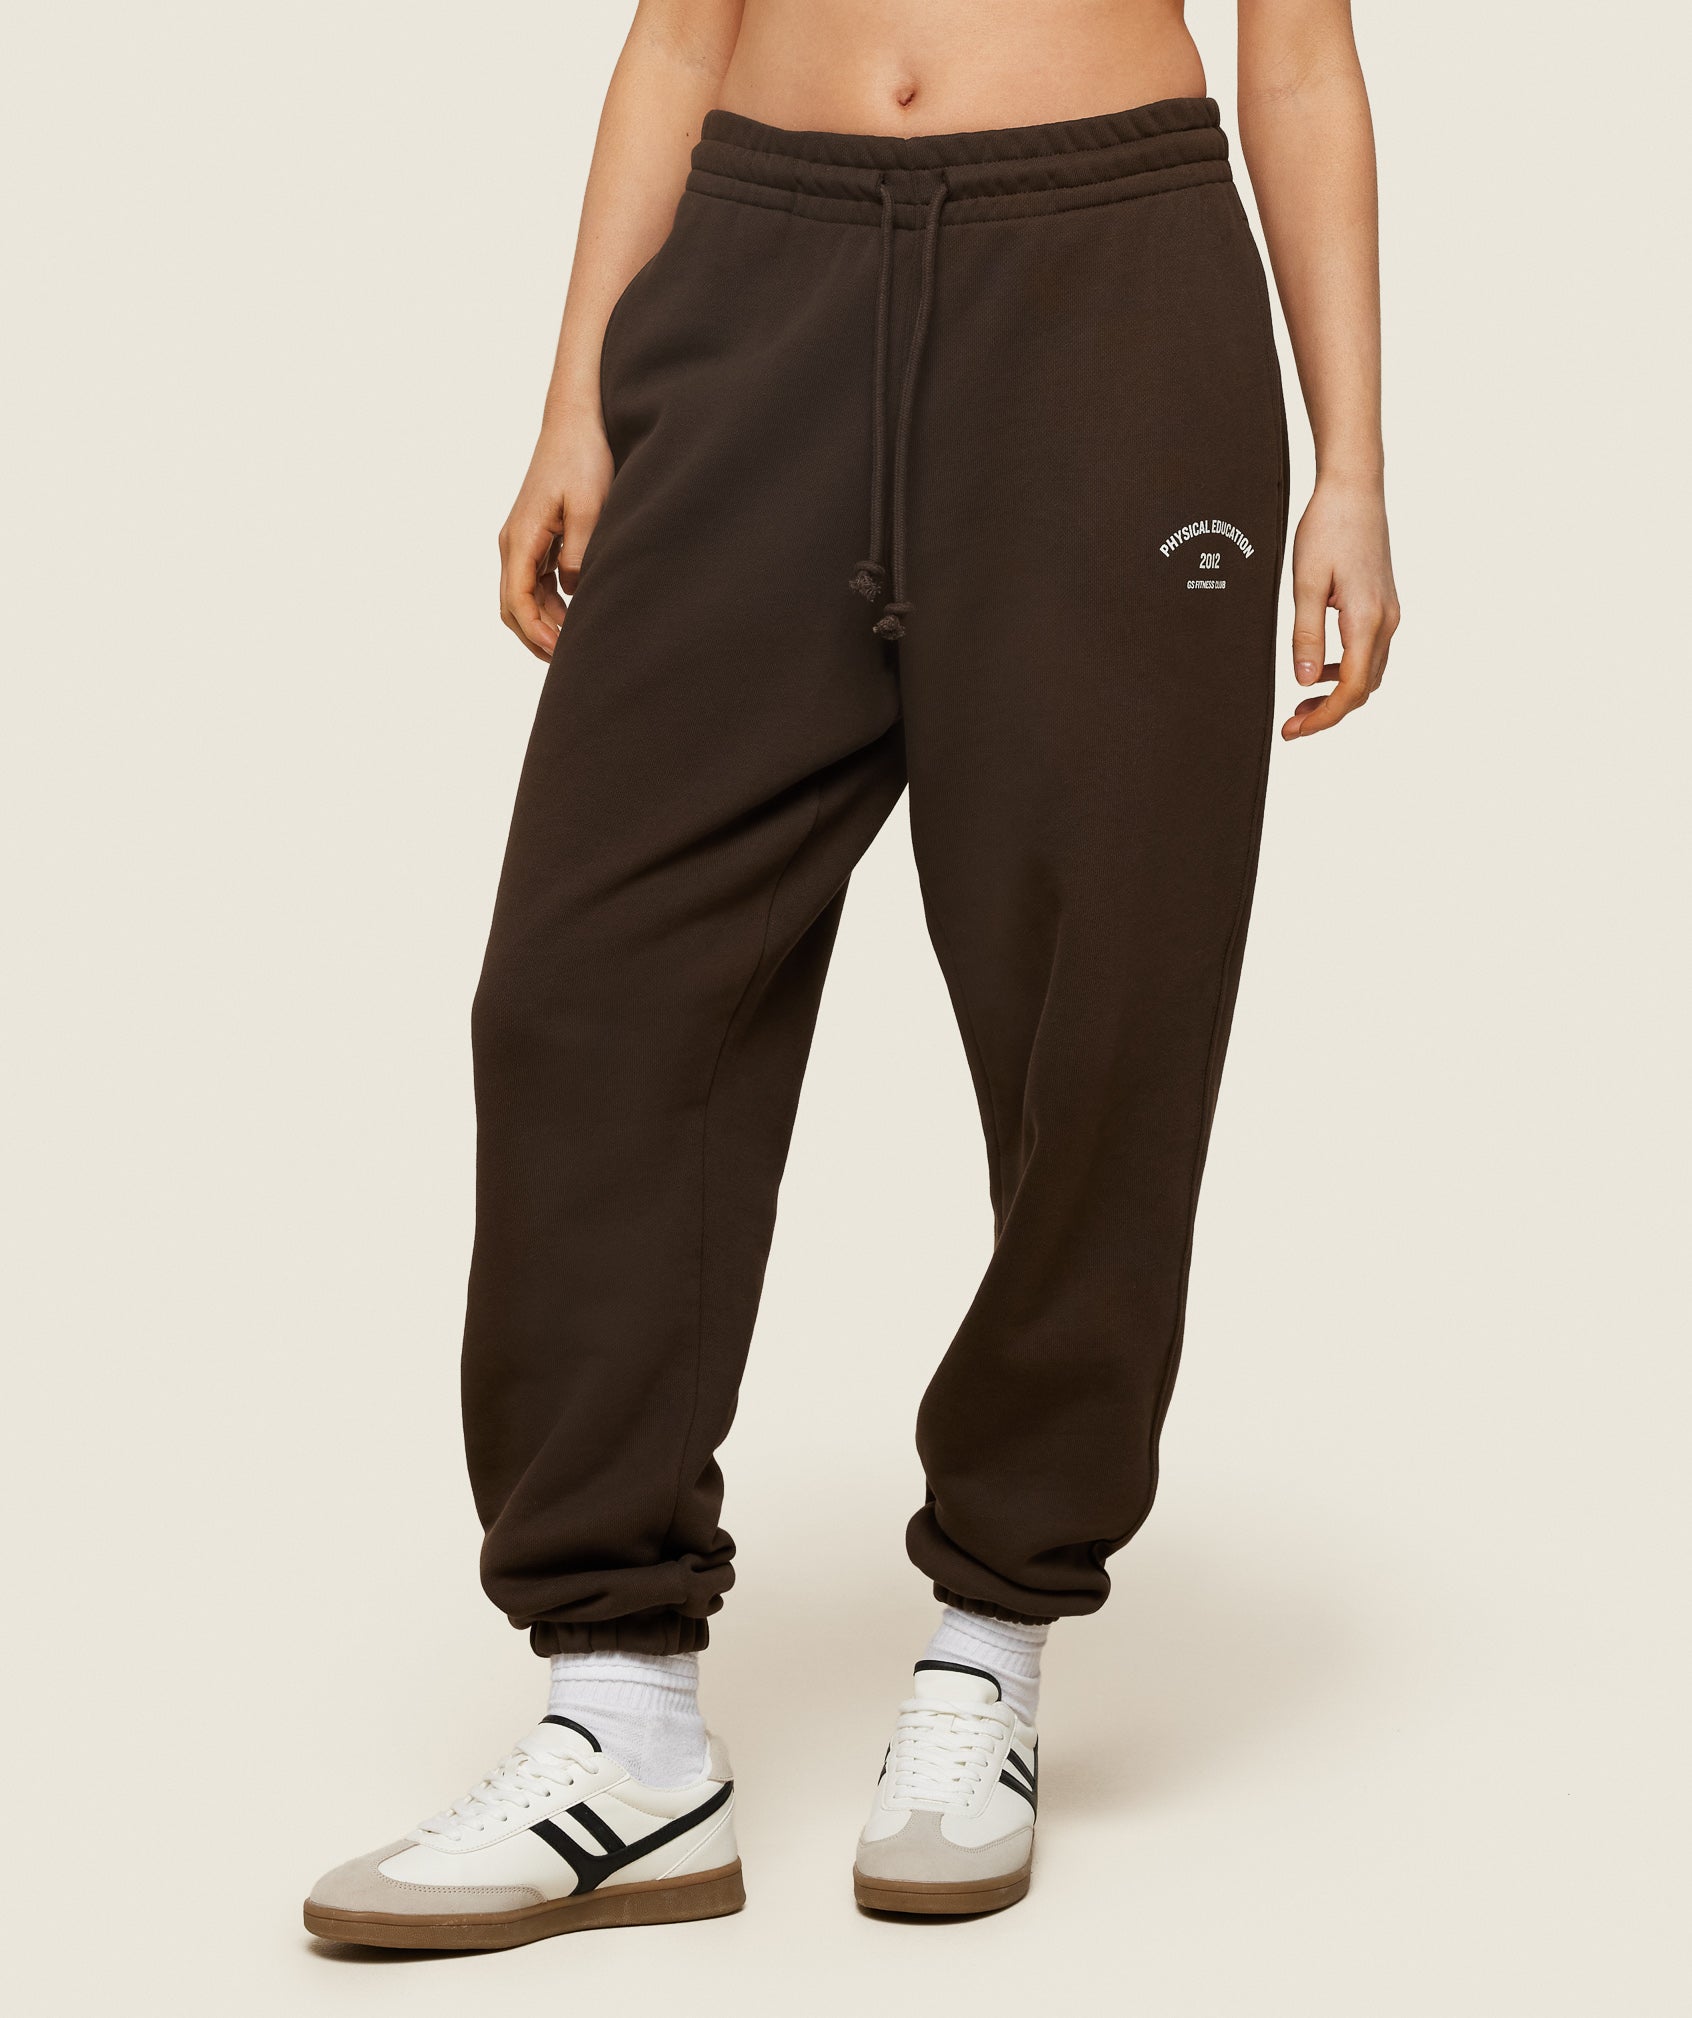 Phys Ed Graphic Sweatpants in Archive Brown